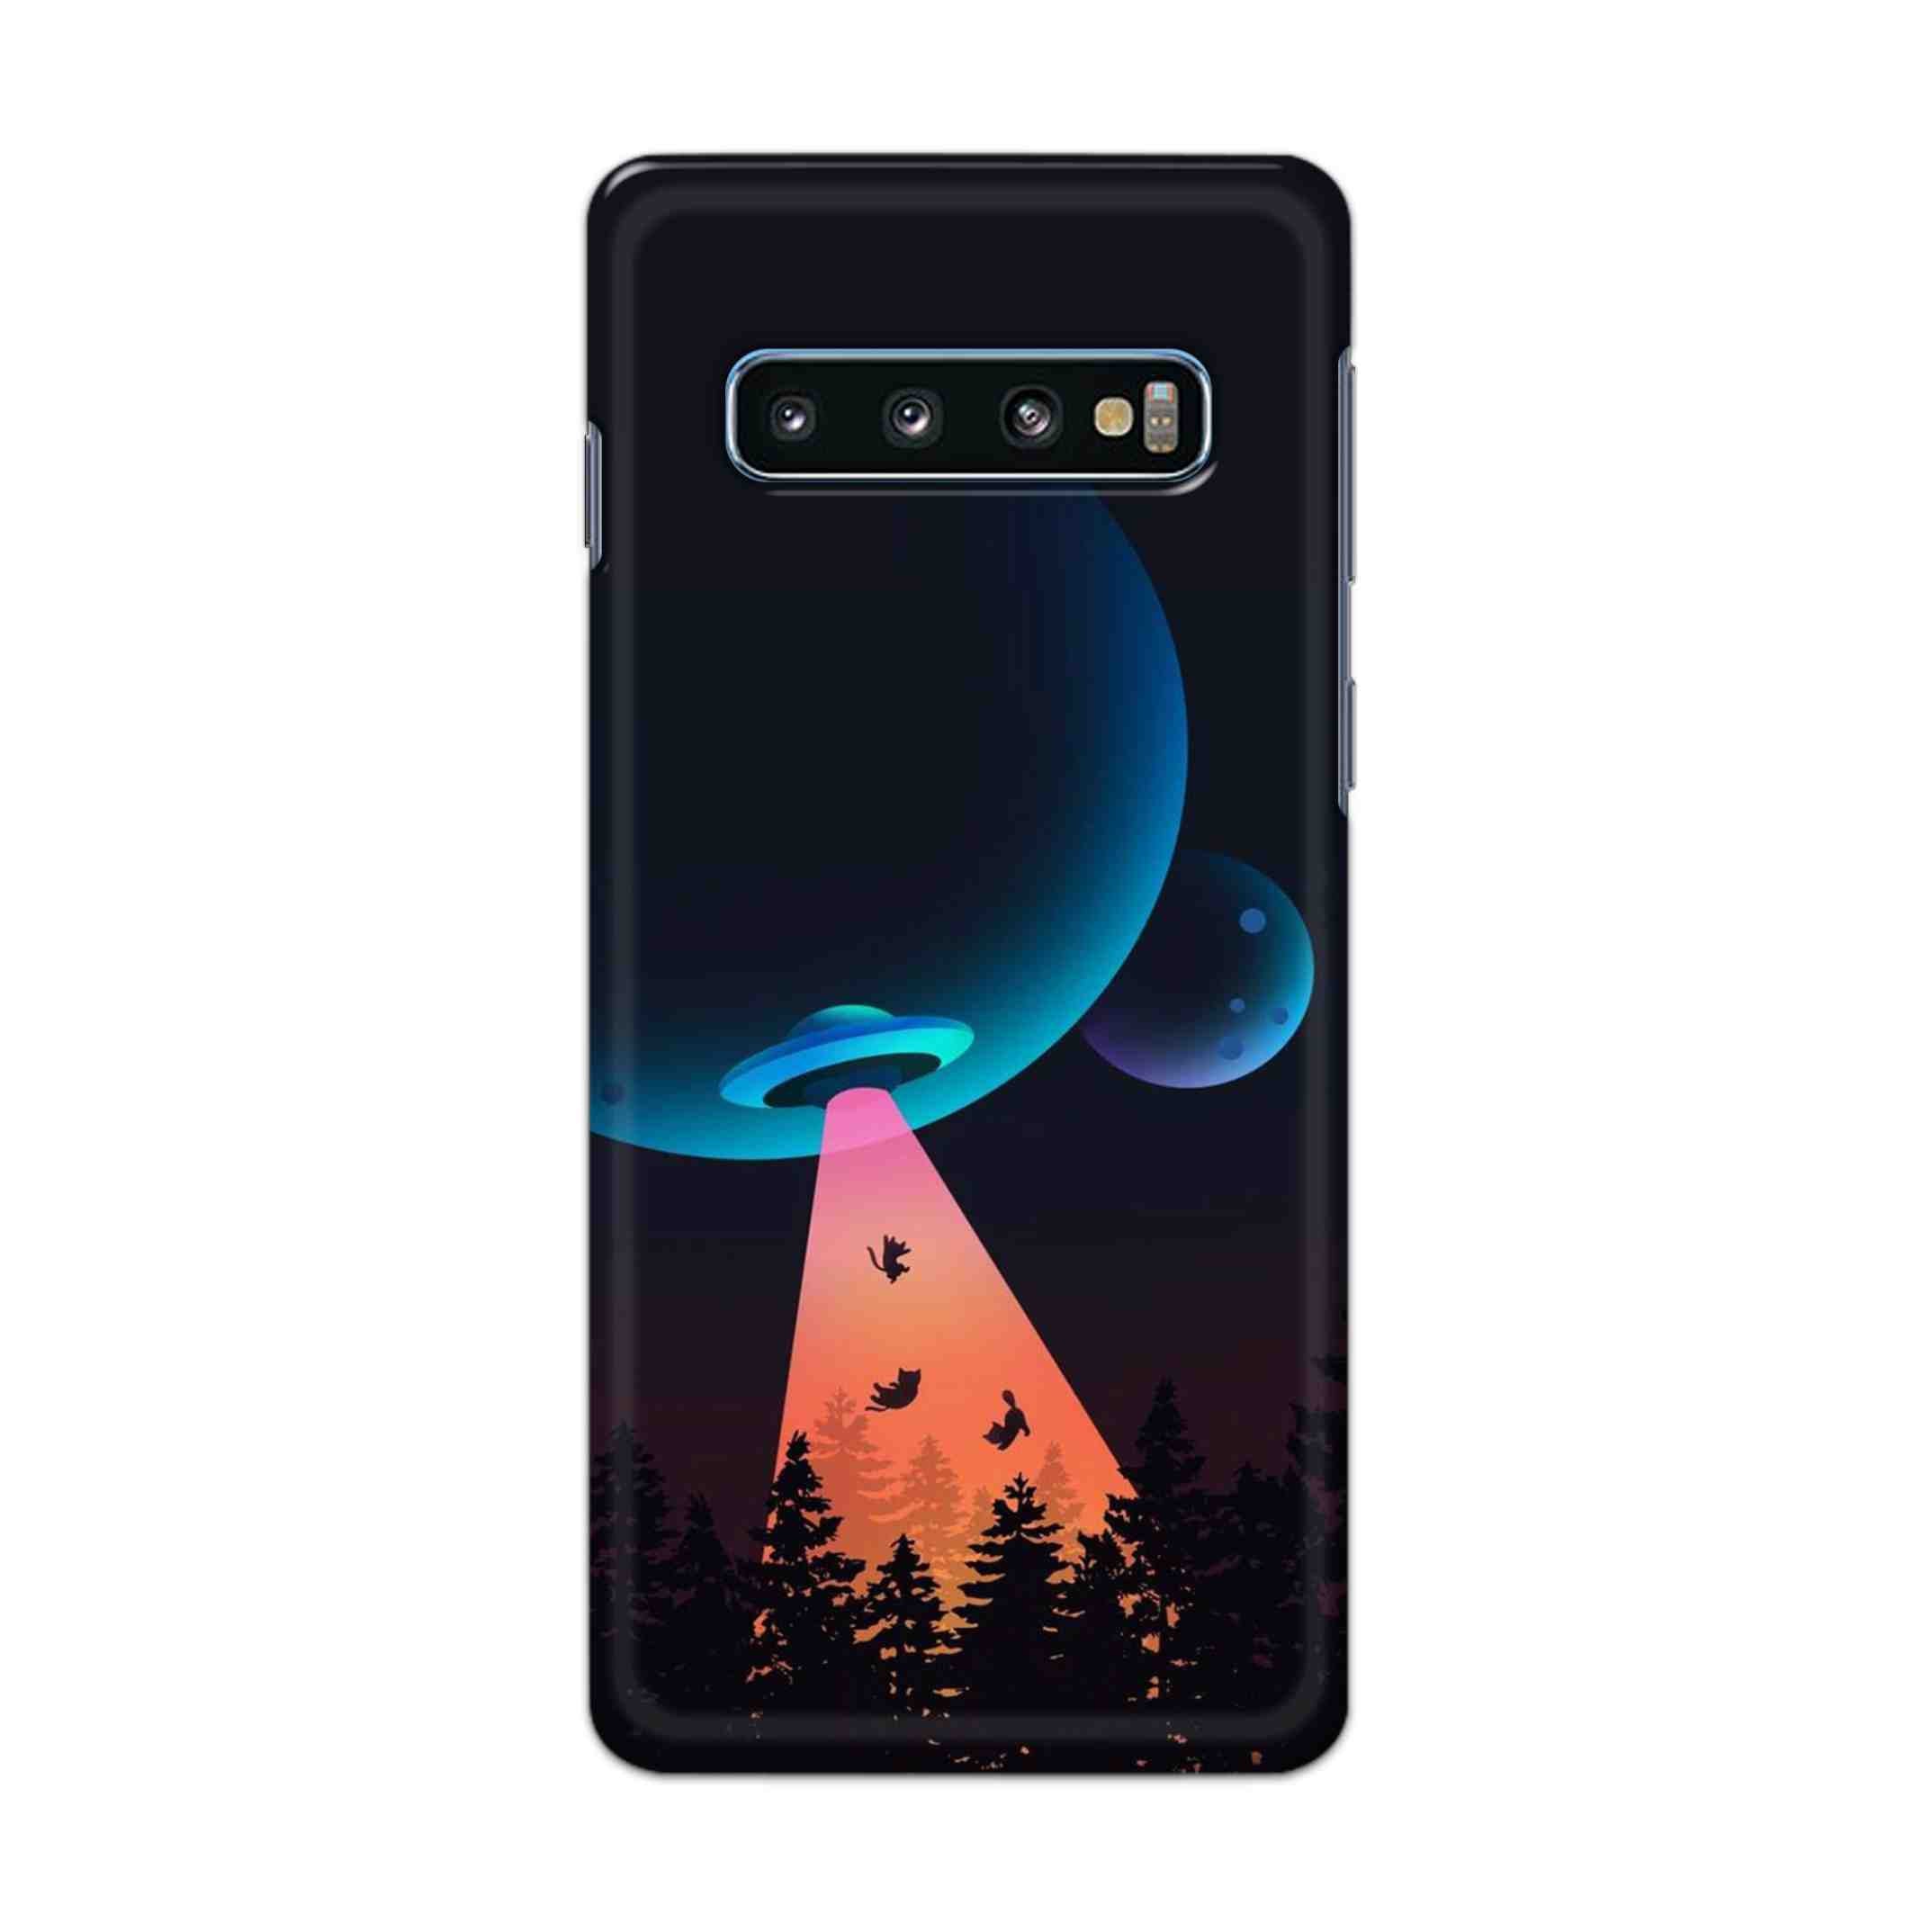 Buy Spaceship Hard Back Mobile Phone Case Cover For Samsung Galaxy S10 Plus Online